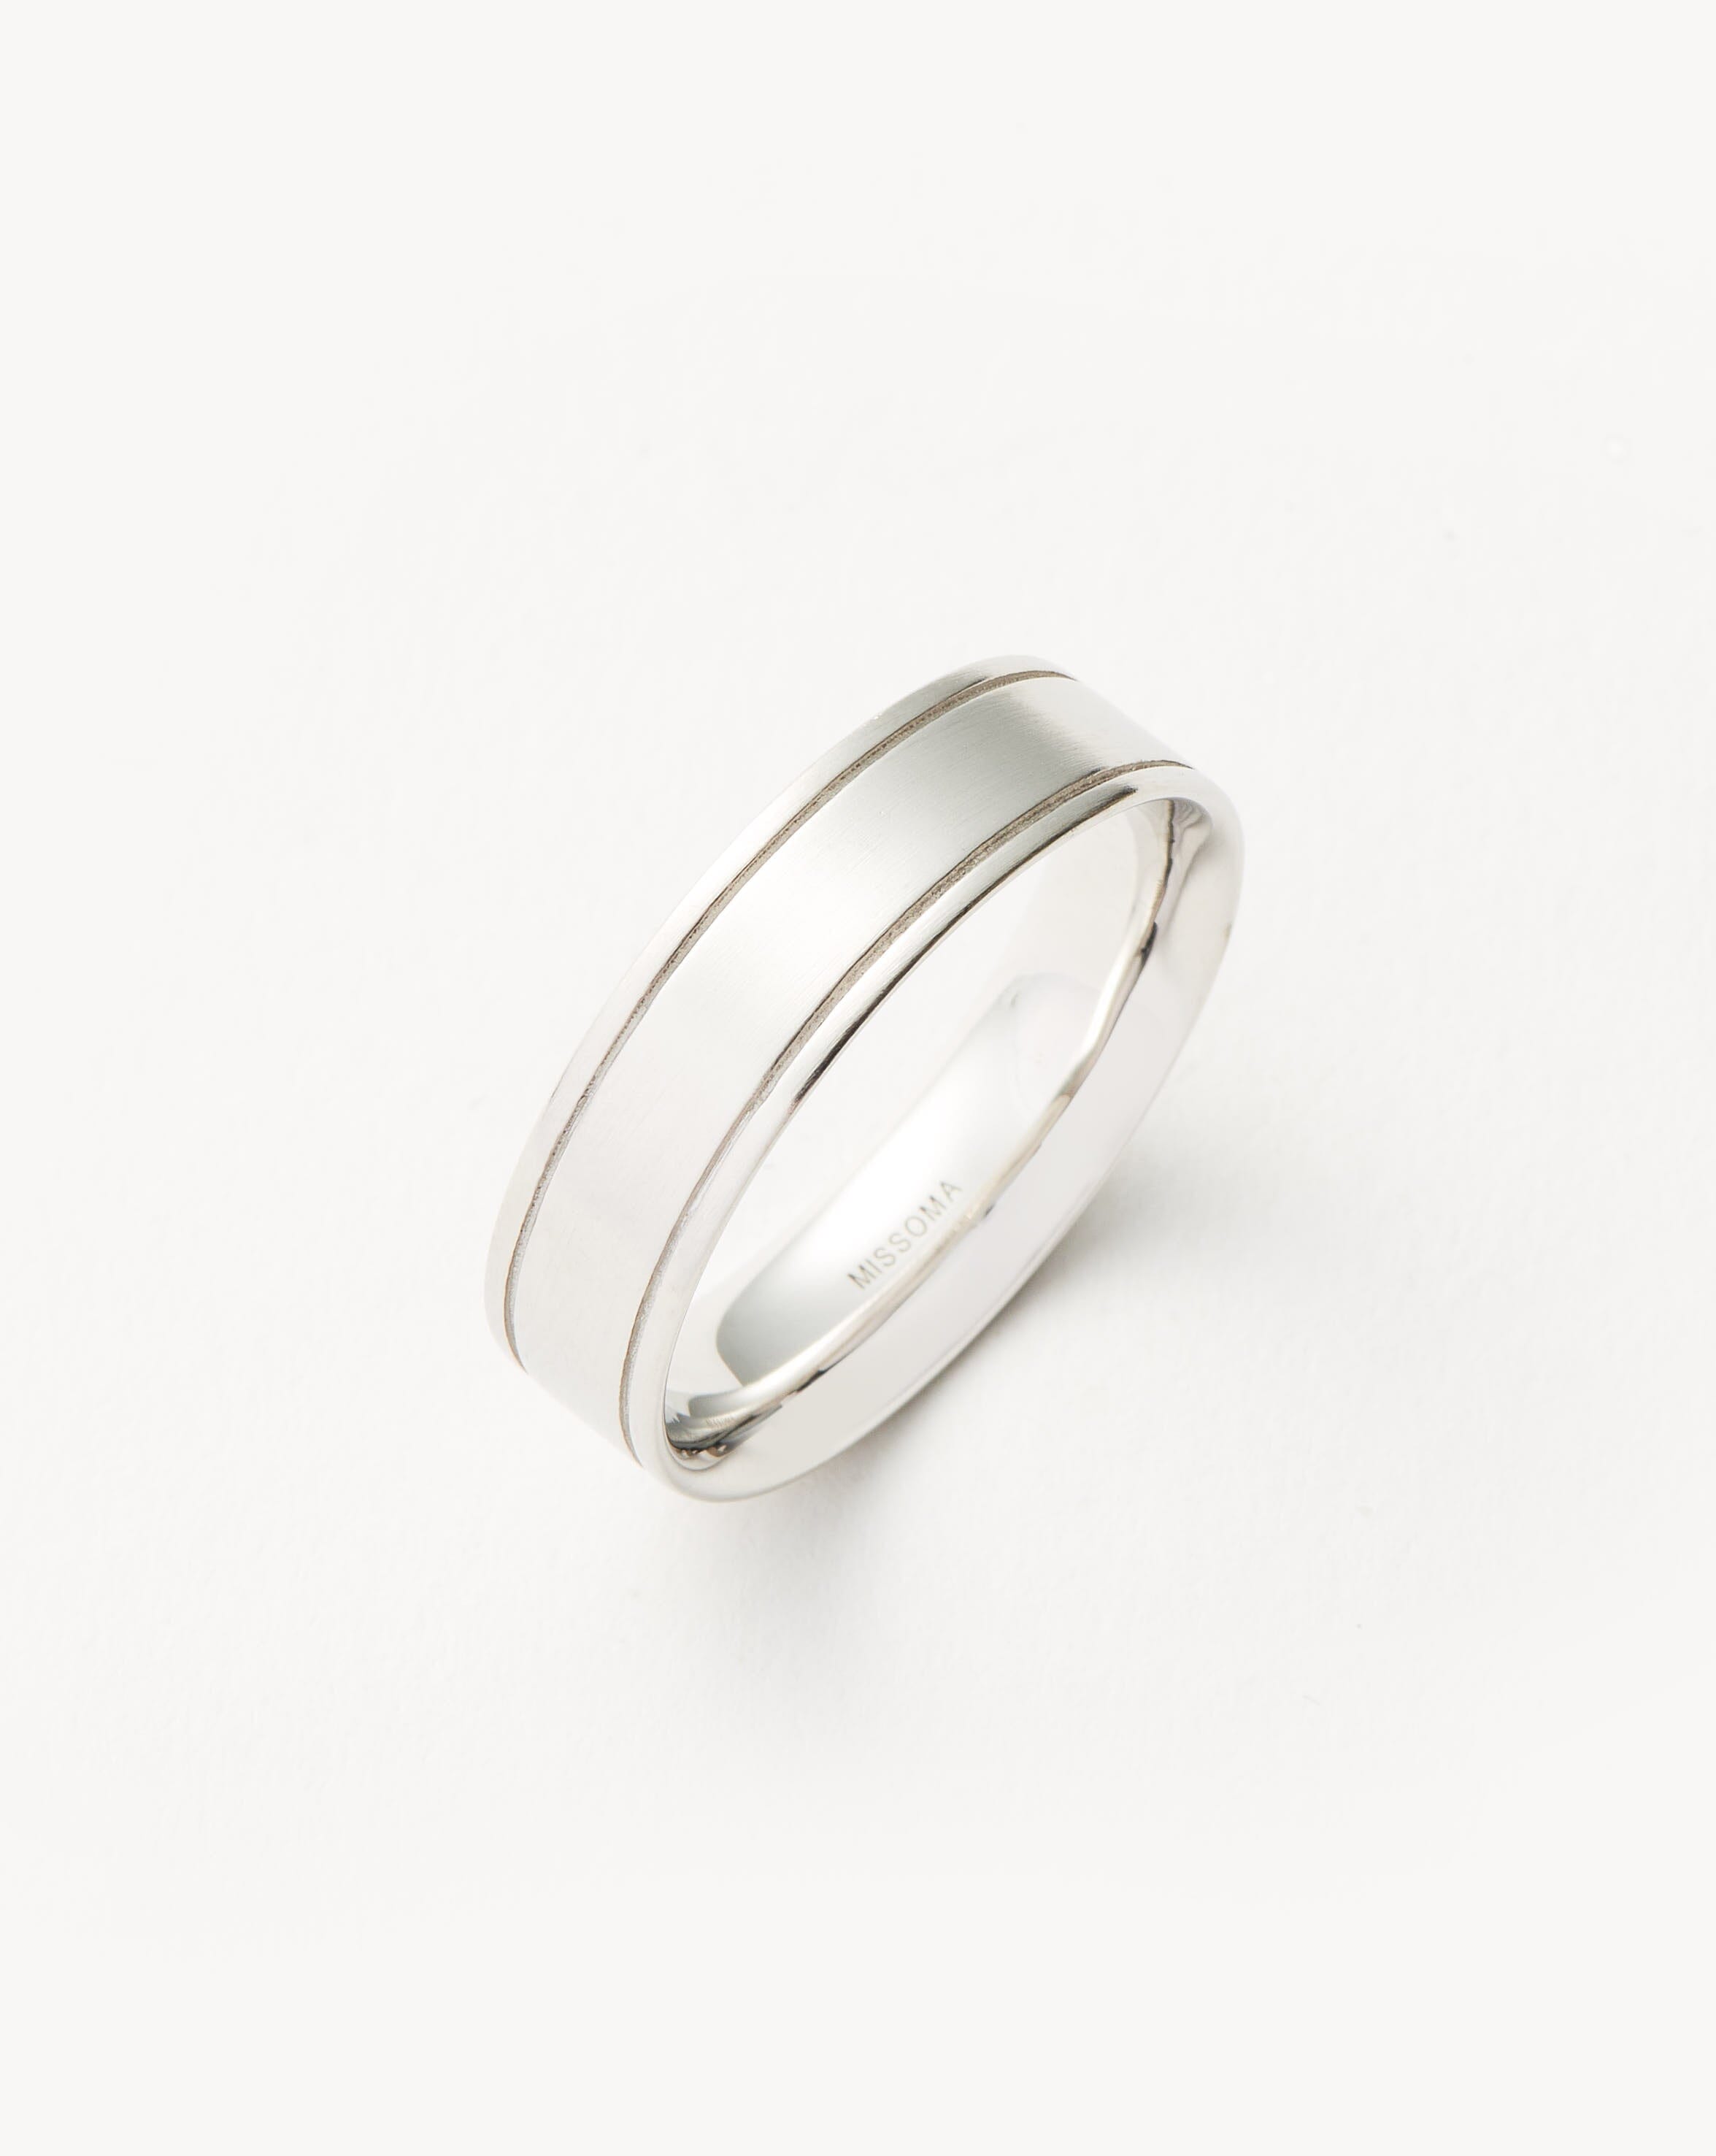 Silver Rings, Sterling Silver Ring, Silver Band, Simple Silver Ring 